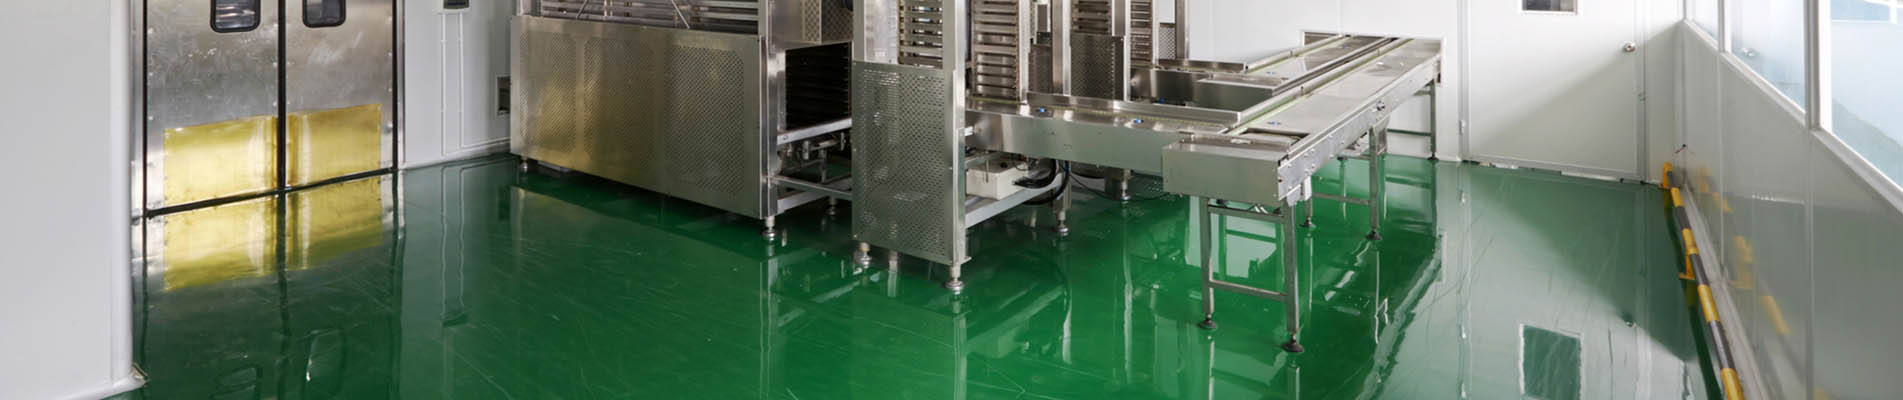 epoxy flooring in manufacturing